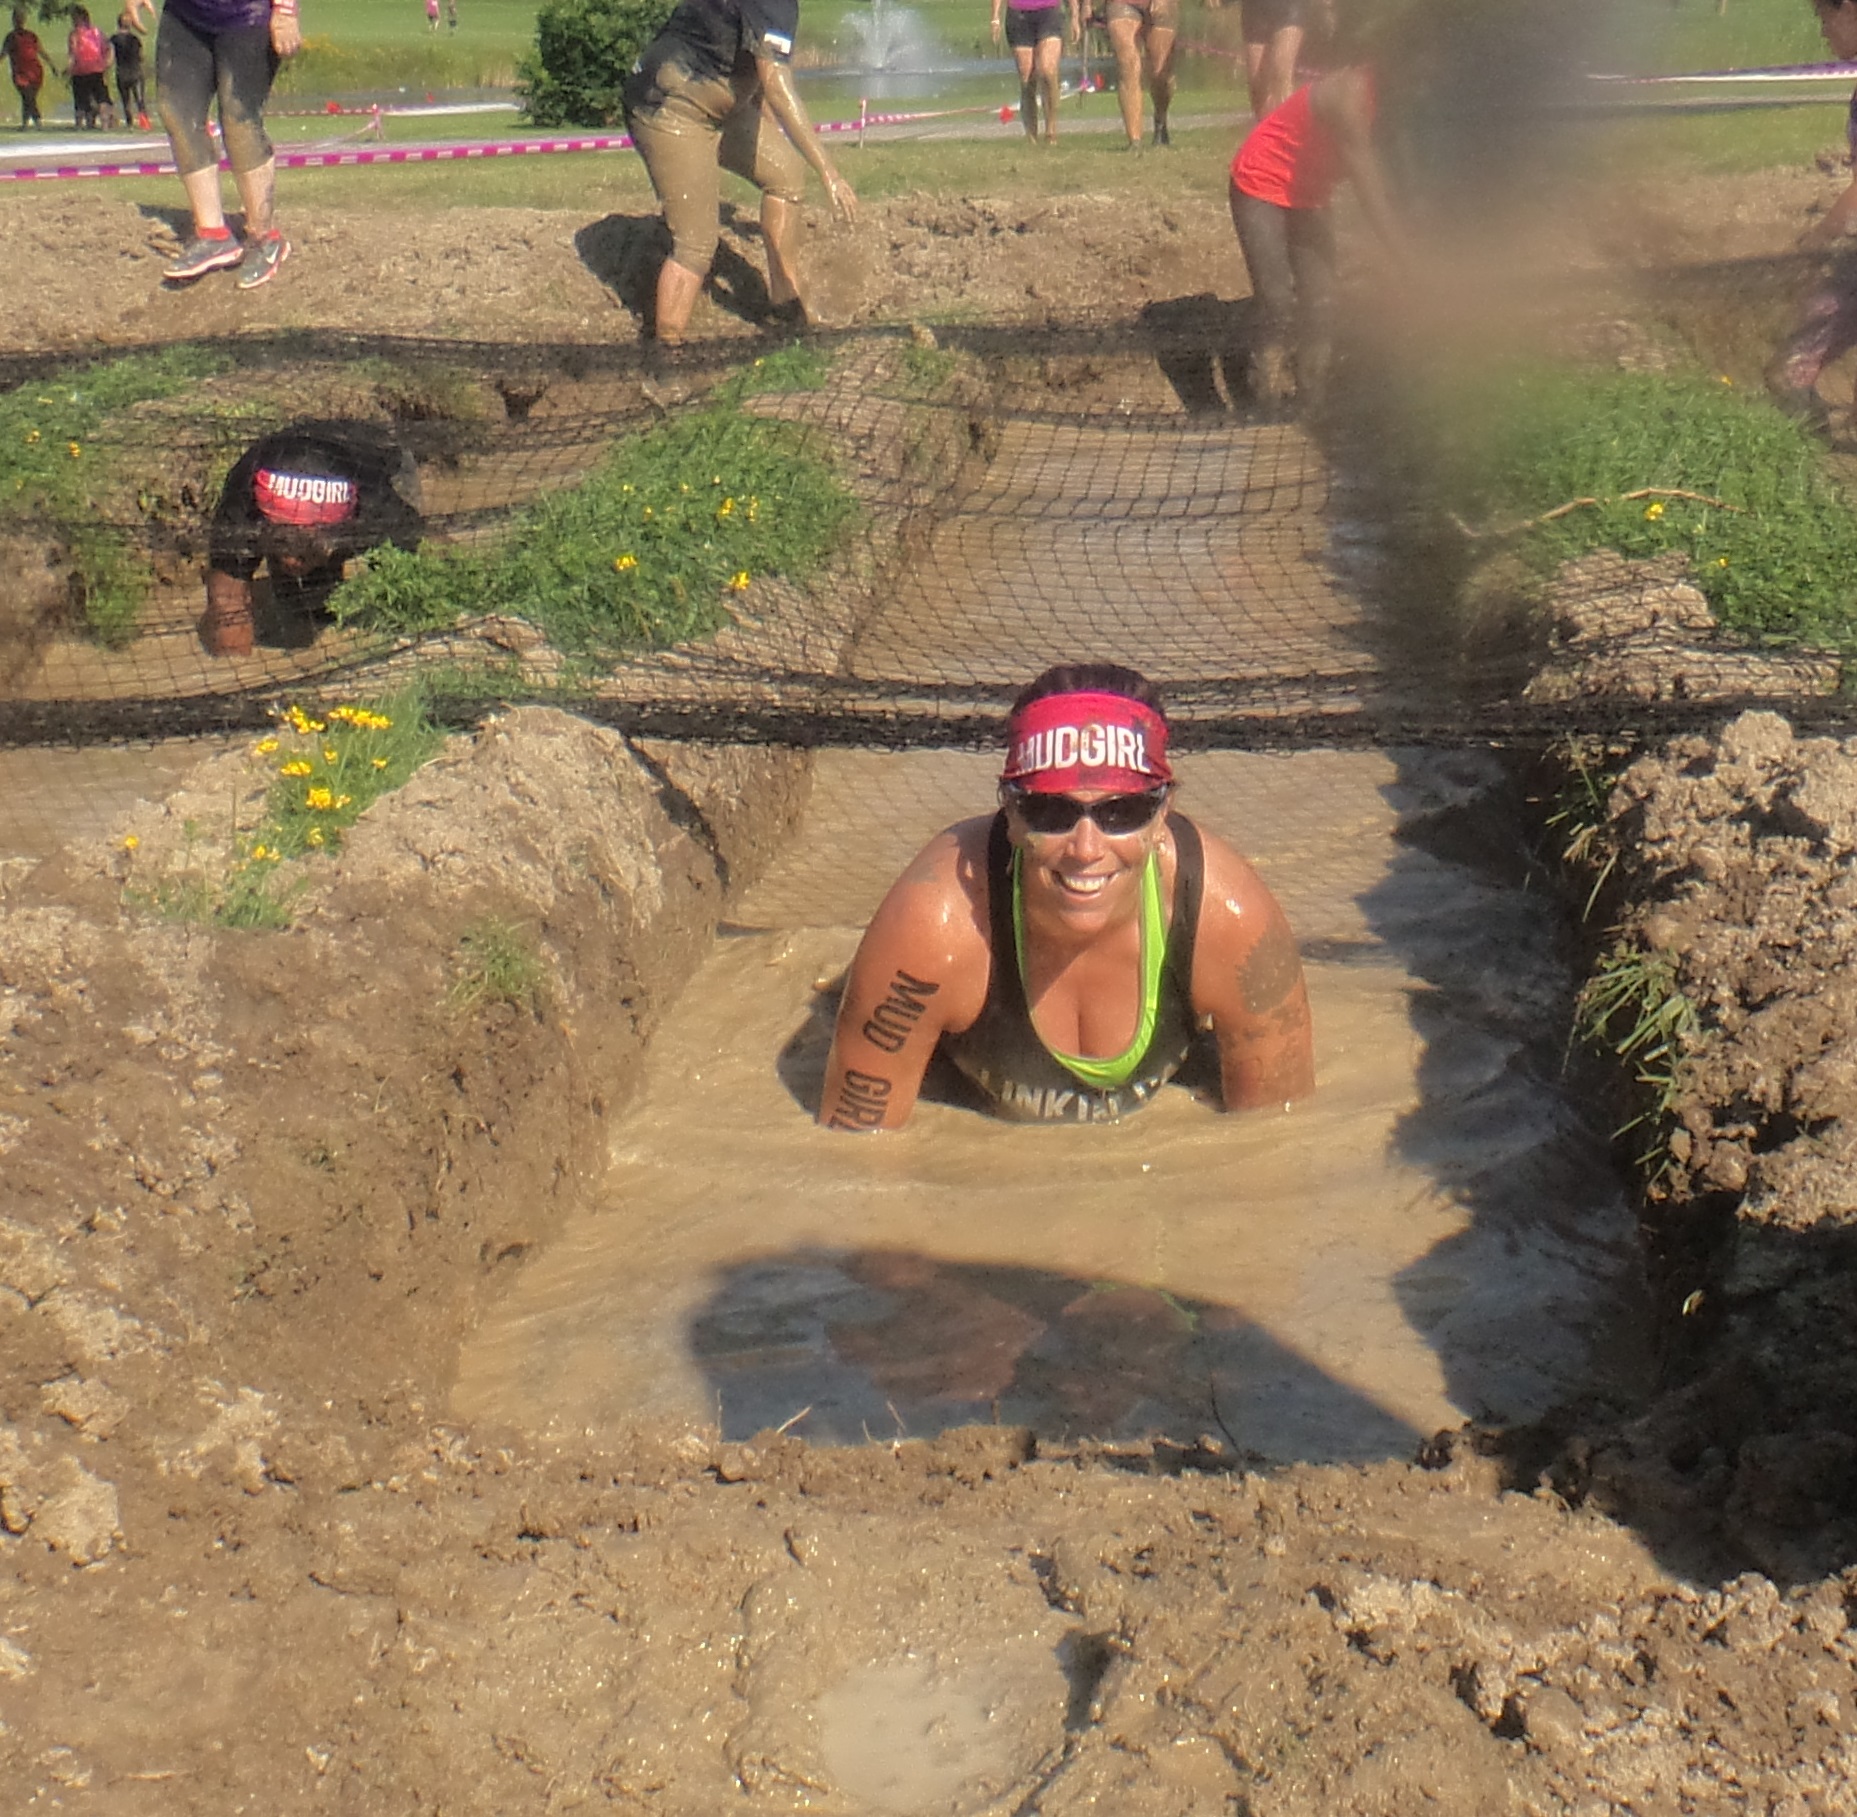 Race Review Ottawa's 2018 Mud Girl Event